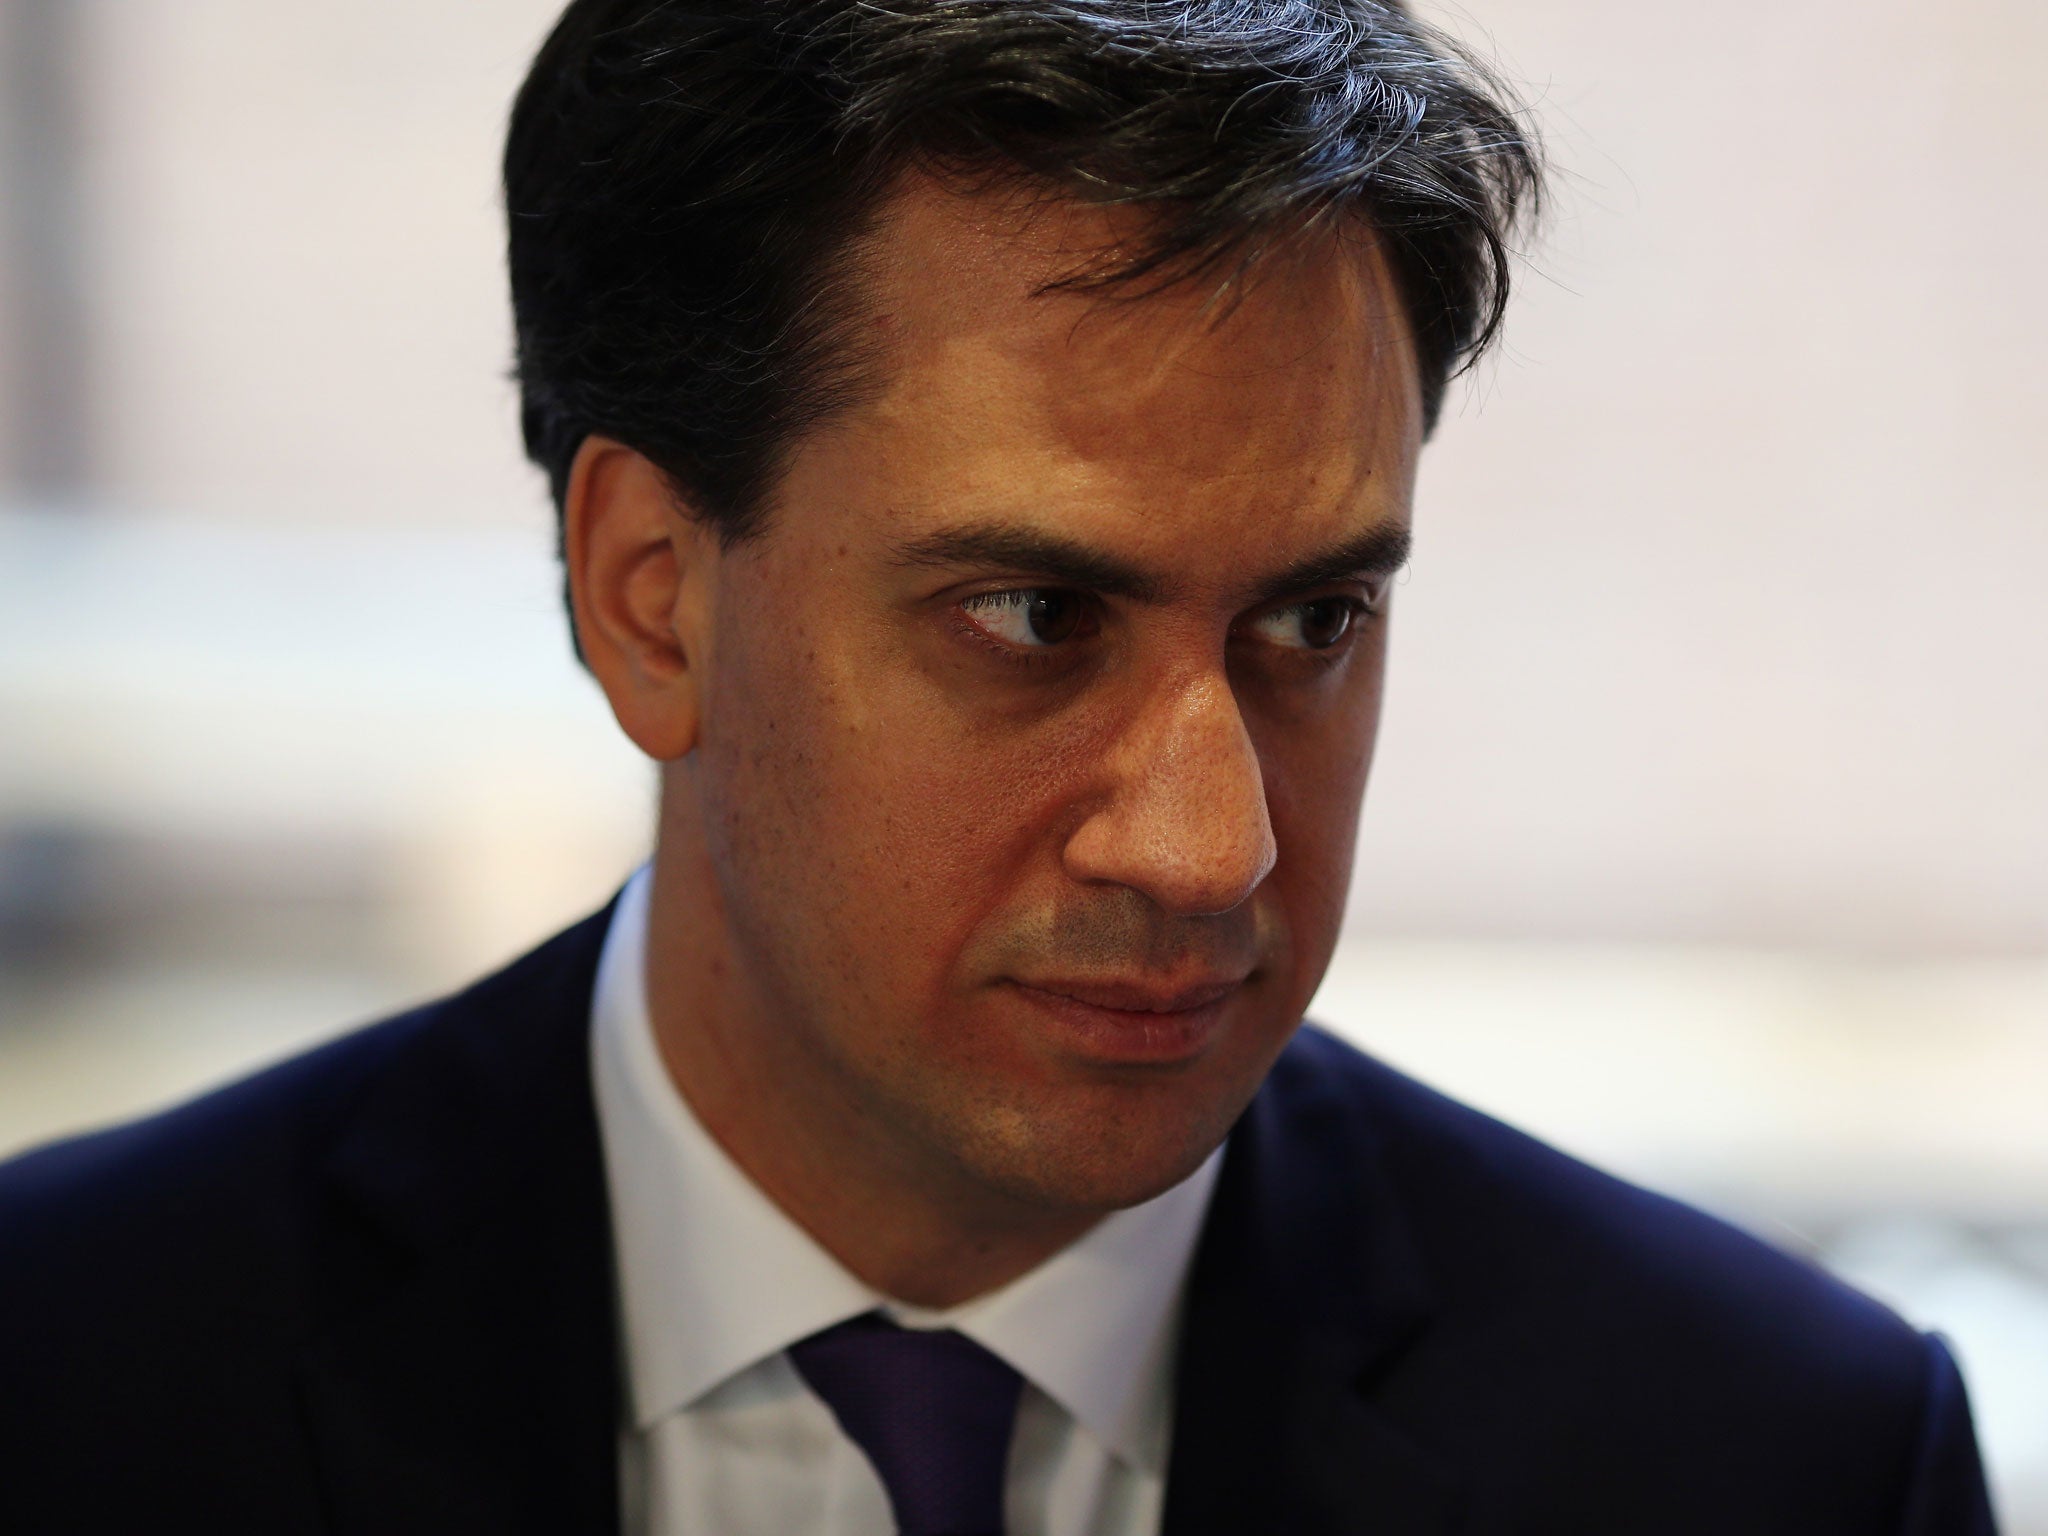 Ed Miliband's pledge to freeze energy prices could be divisive, Lord Liddle has warned